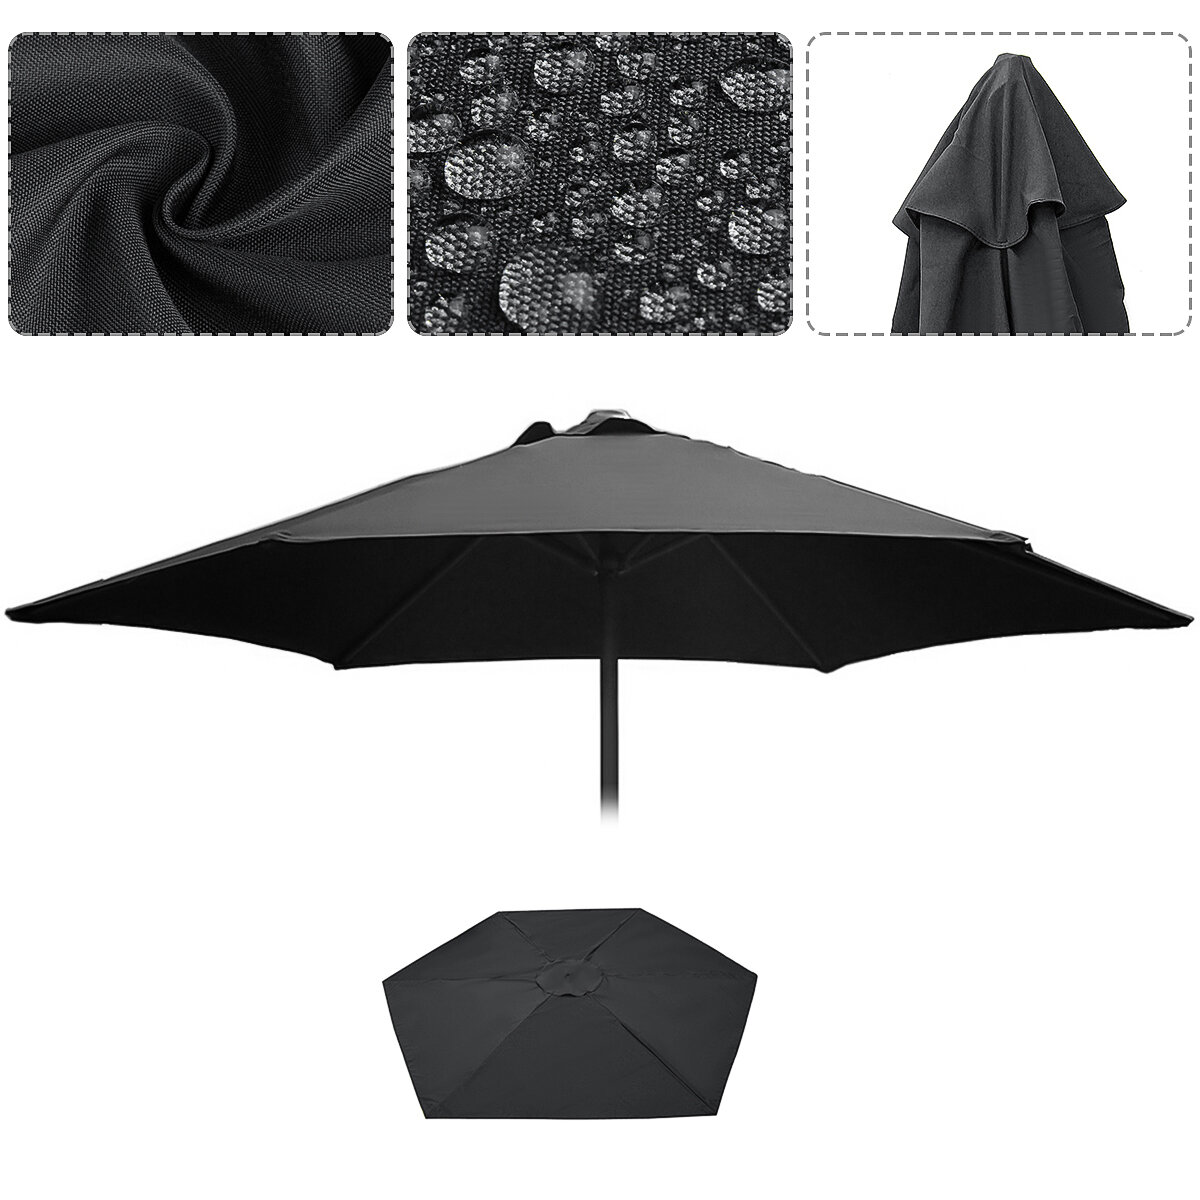 Image of Polyester 27M Round Garden Parasol Outdoor Umbrella Sun Shade Canopy Cover Waterproof UV Protect Parasol Cover